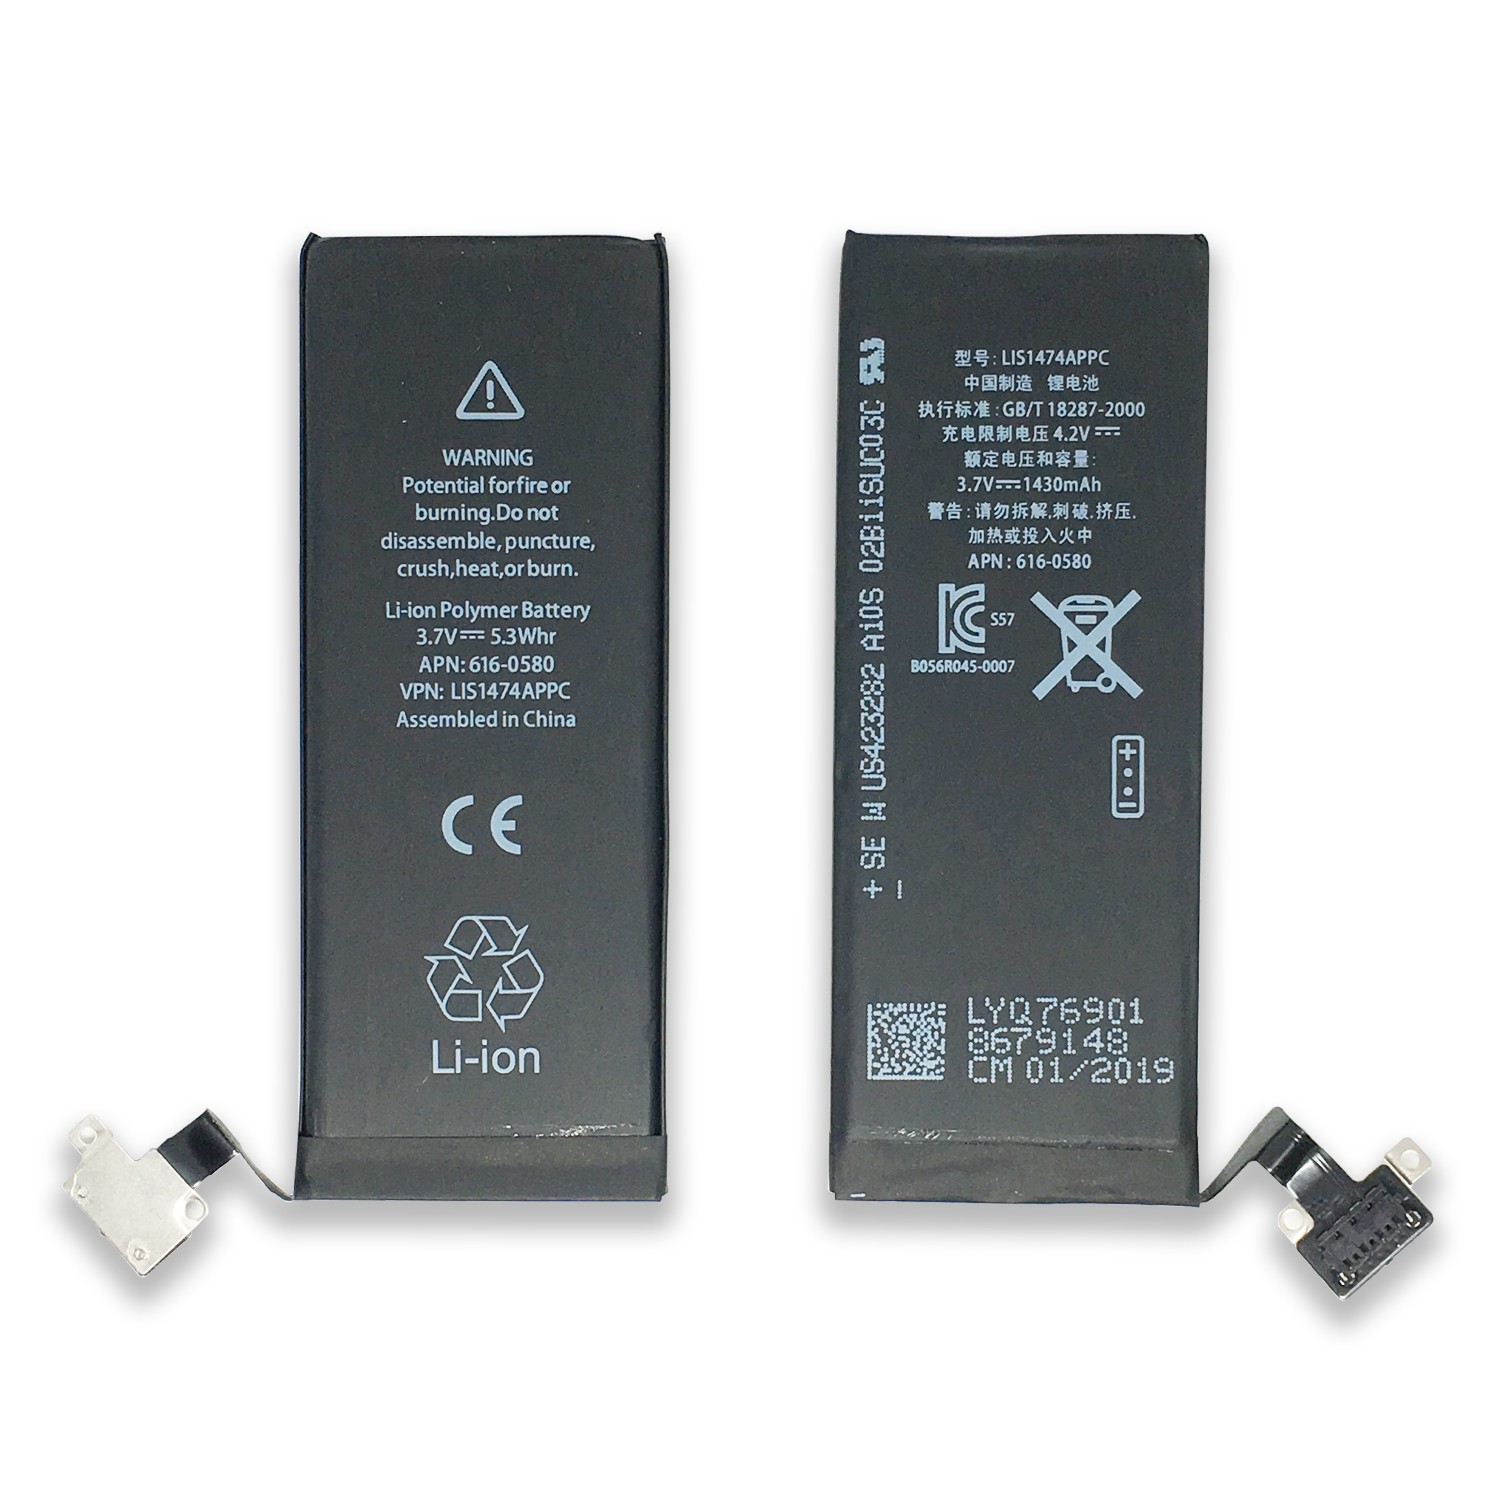 Hot sale Mobile Phone Batteries 1430mAh for iPhone 4S battery